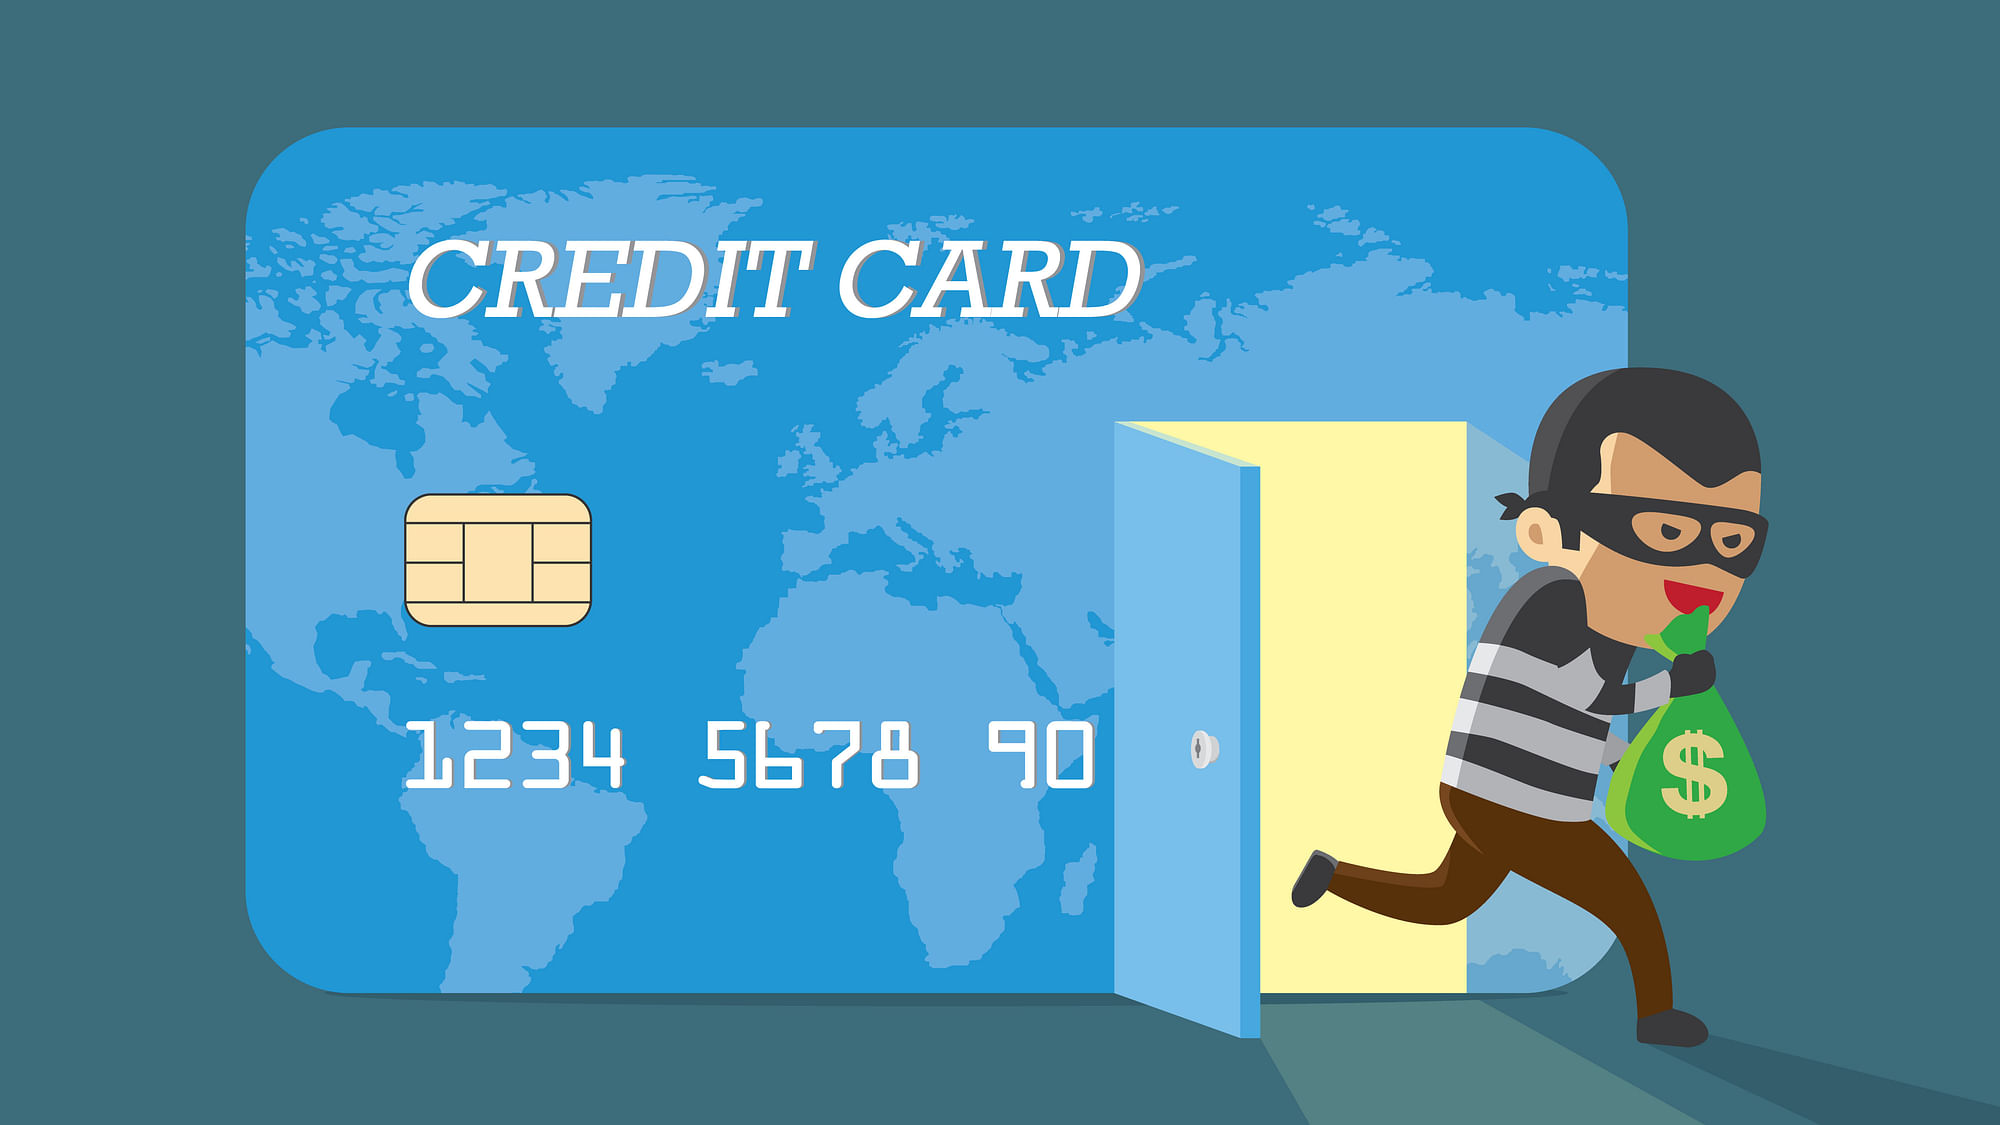 About 580 unissued credit cards were issued to facilitate 1730 transactions. (Illustration: iStock)